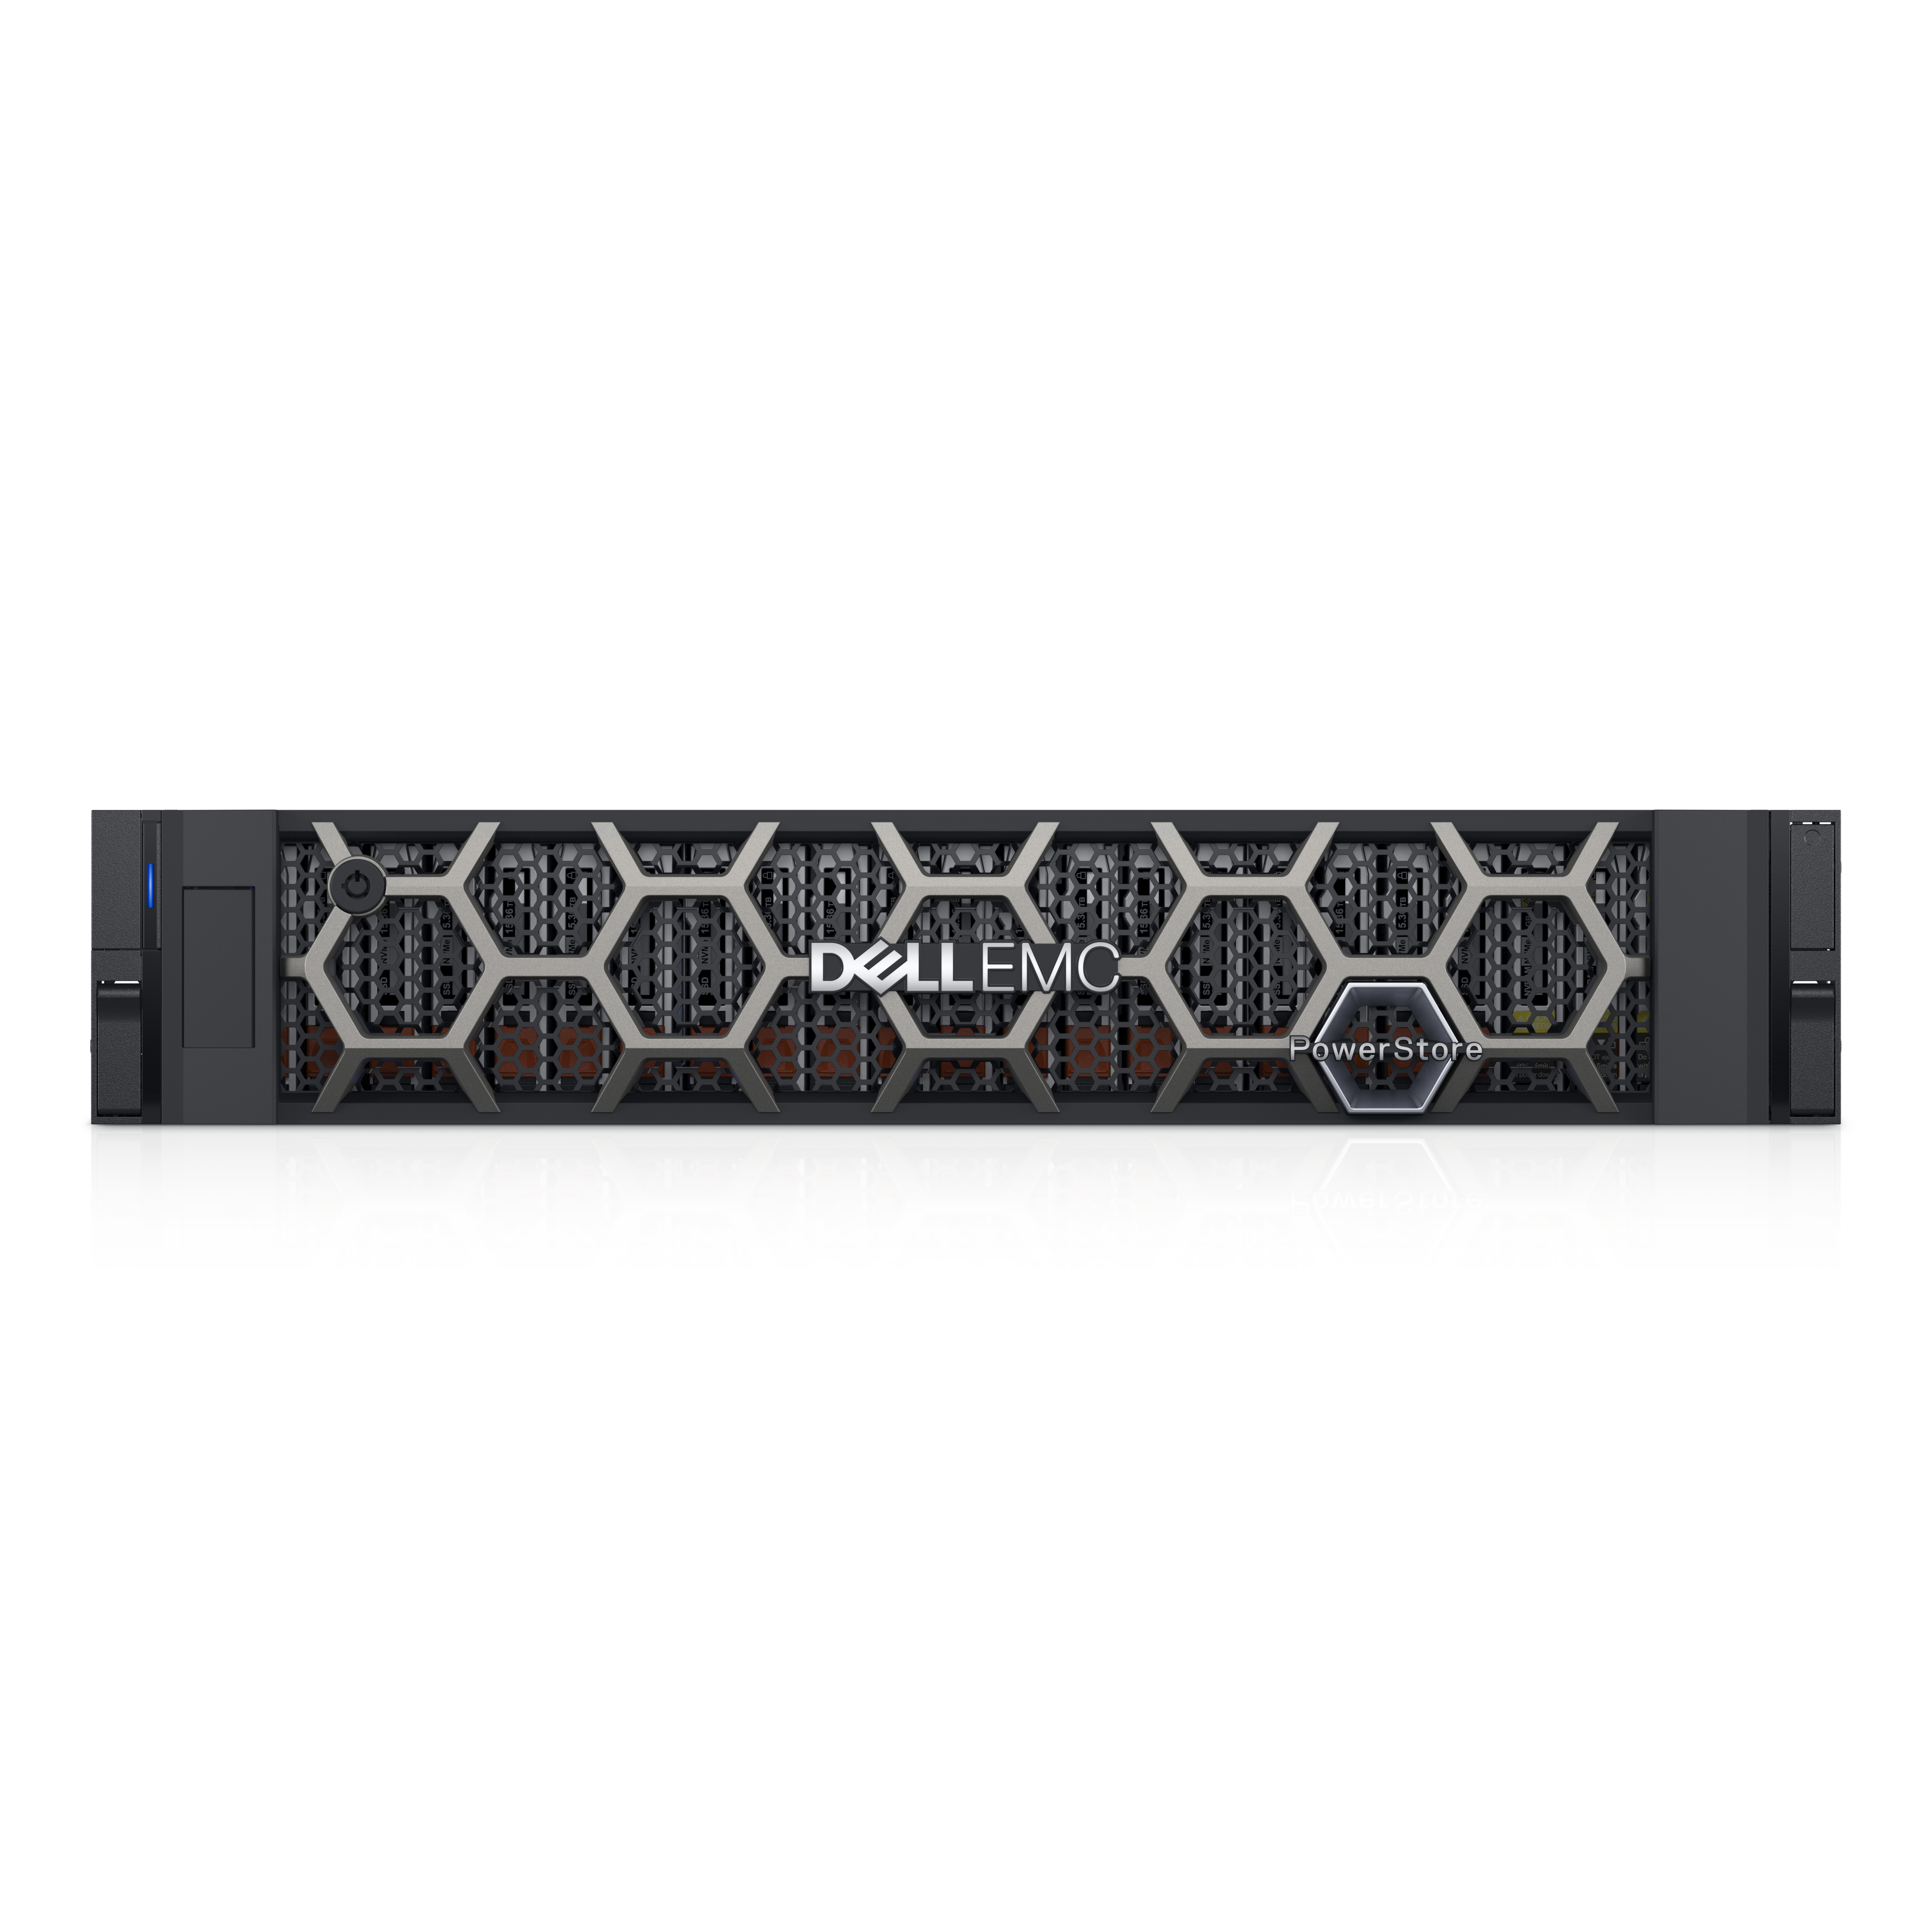 DELL POWERSTORE 2U 25 X 2.5IN NVME CHASSIS 6 X 1.92TB NVME SSD 3YR